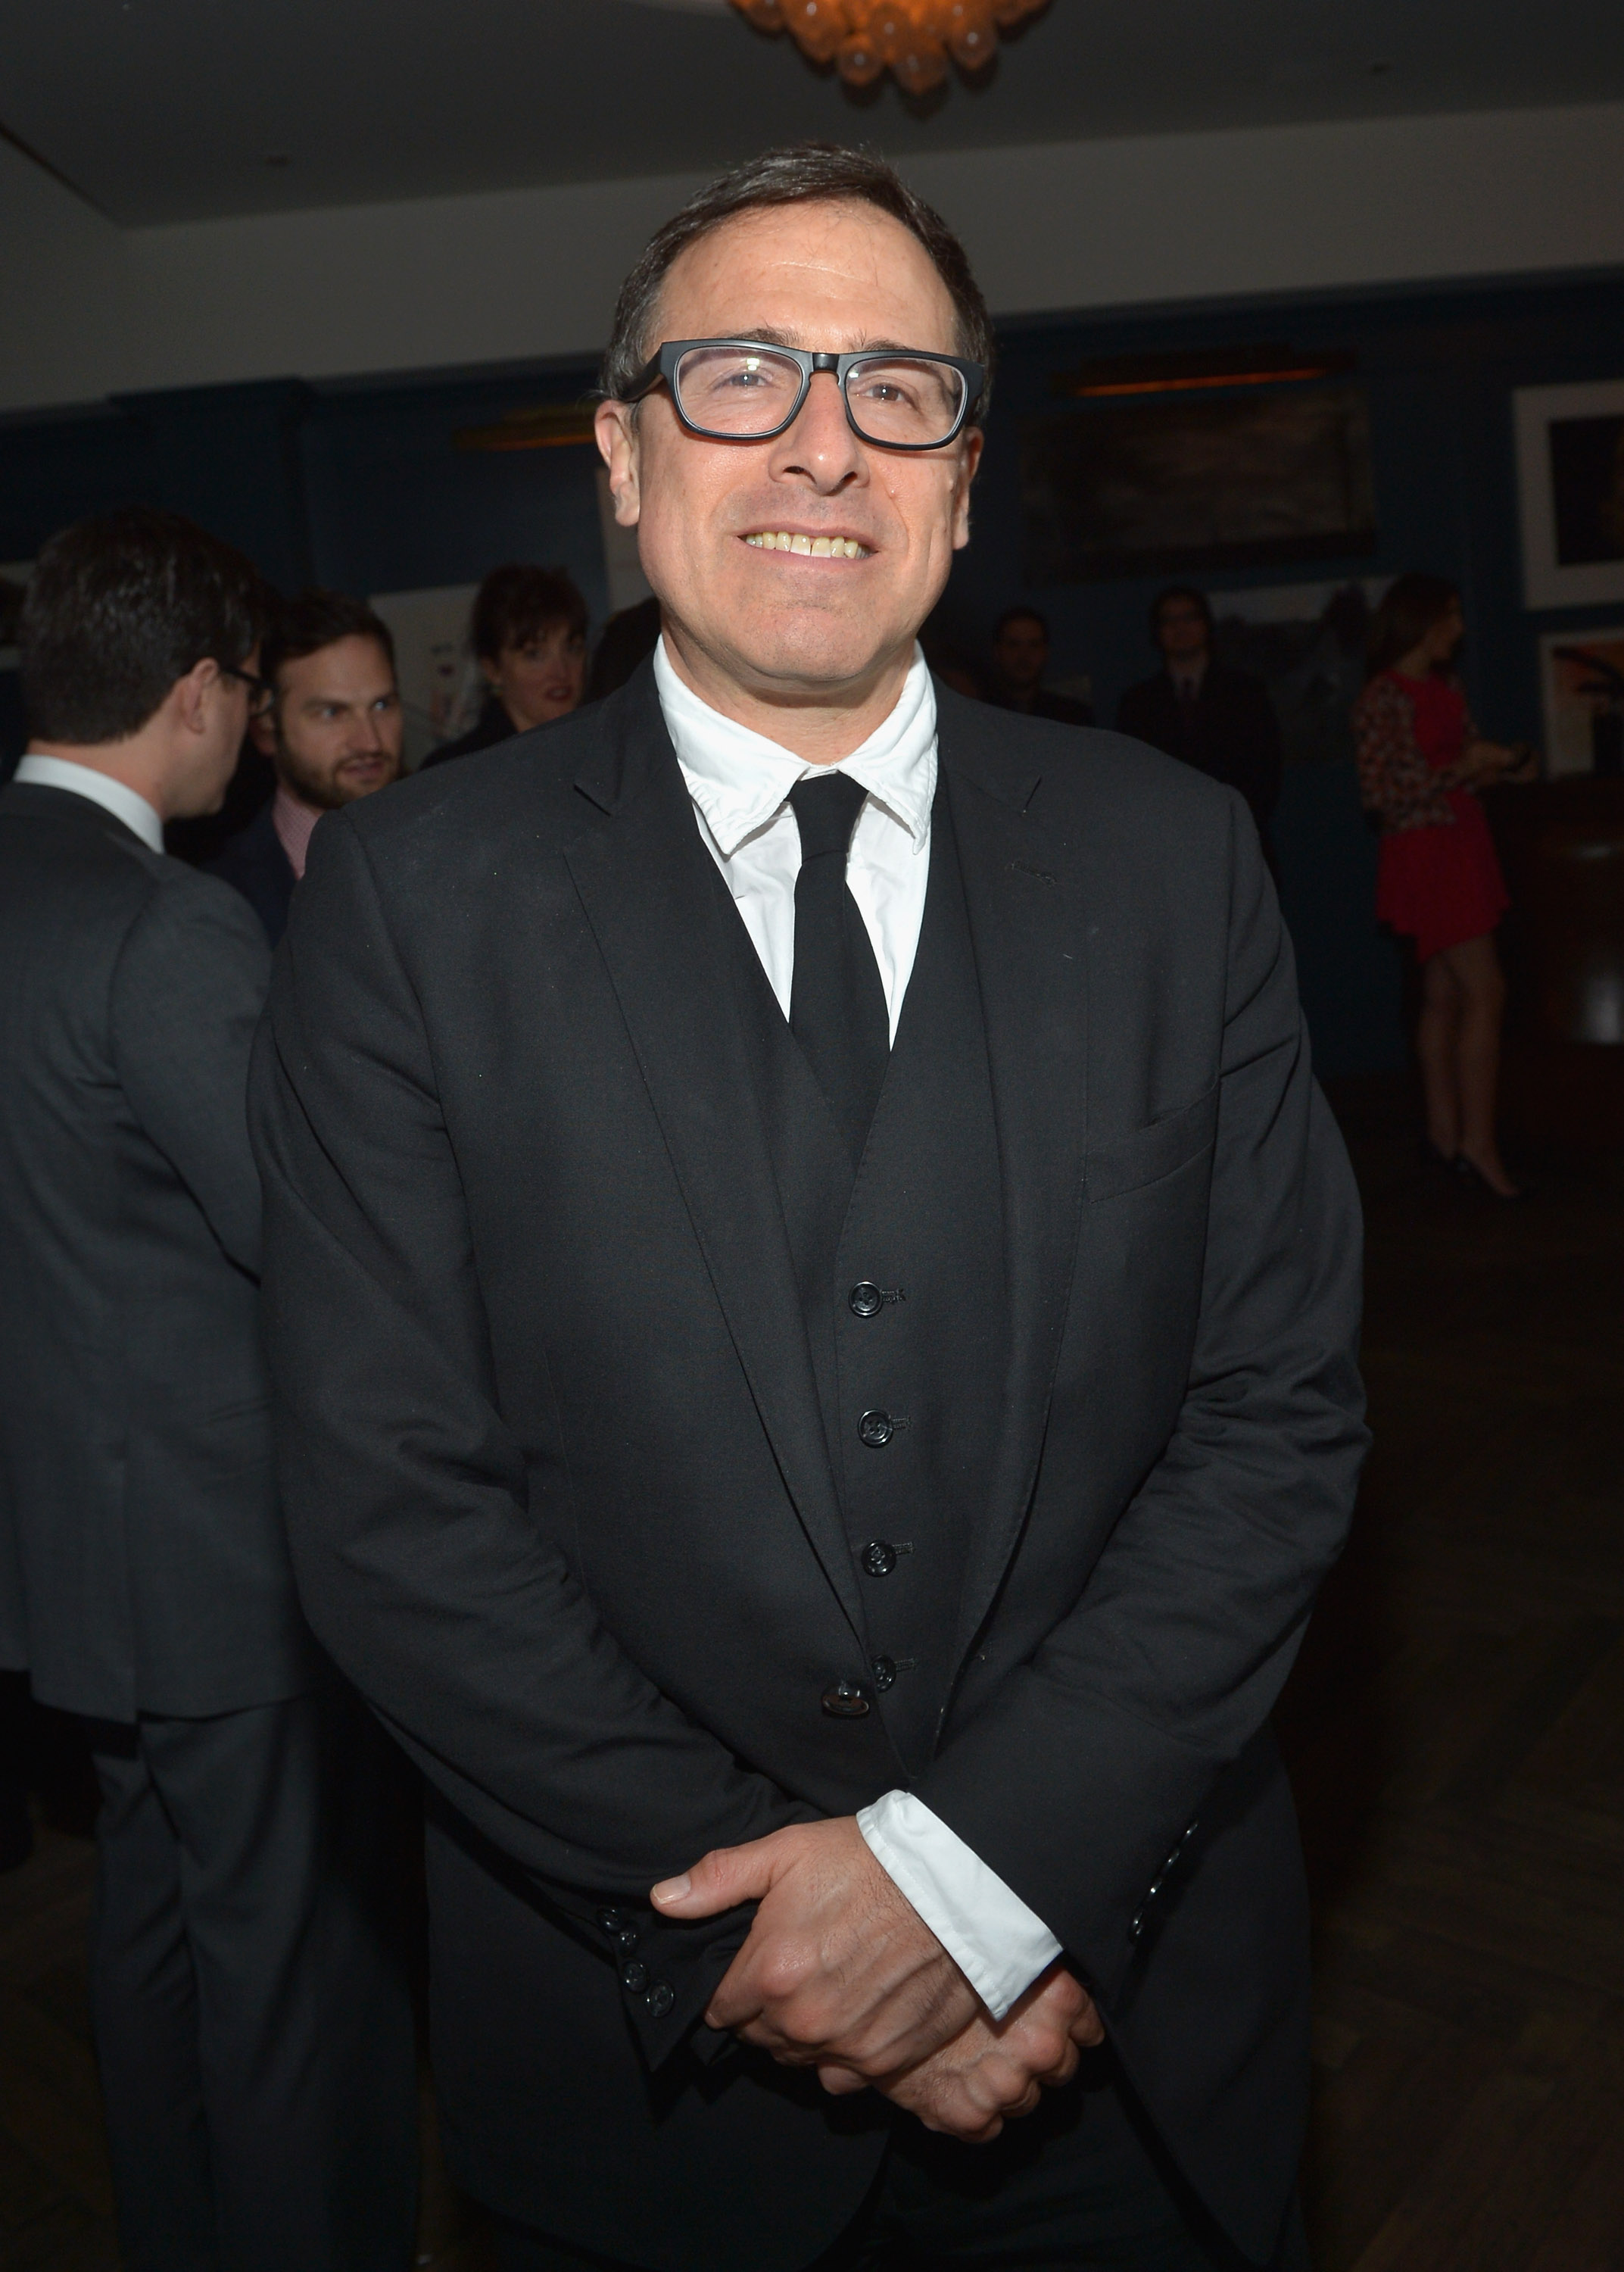 WEST HOLLYWOOD, CA - FEBRUARY 23:  Director David O. Russell attends The Weinstein Company and Chopard's Academy Award Party in association with Grey Goose at Soho House on February 23, 2013 in West Hollywood, California.  (Photo by Charley Gallay/Getty Images for Grey Goose vodka)